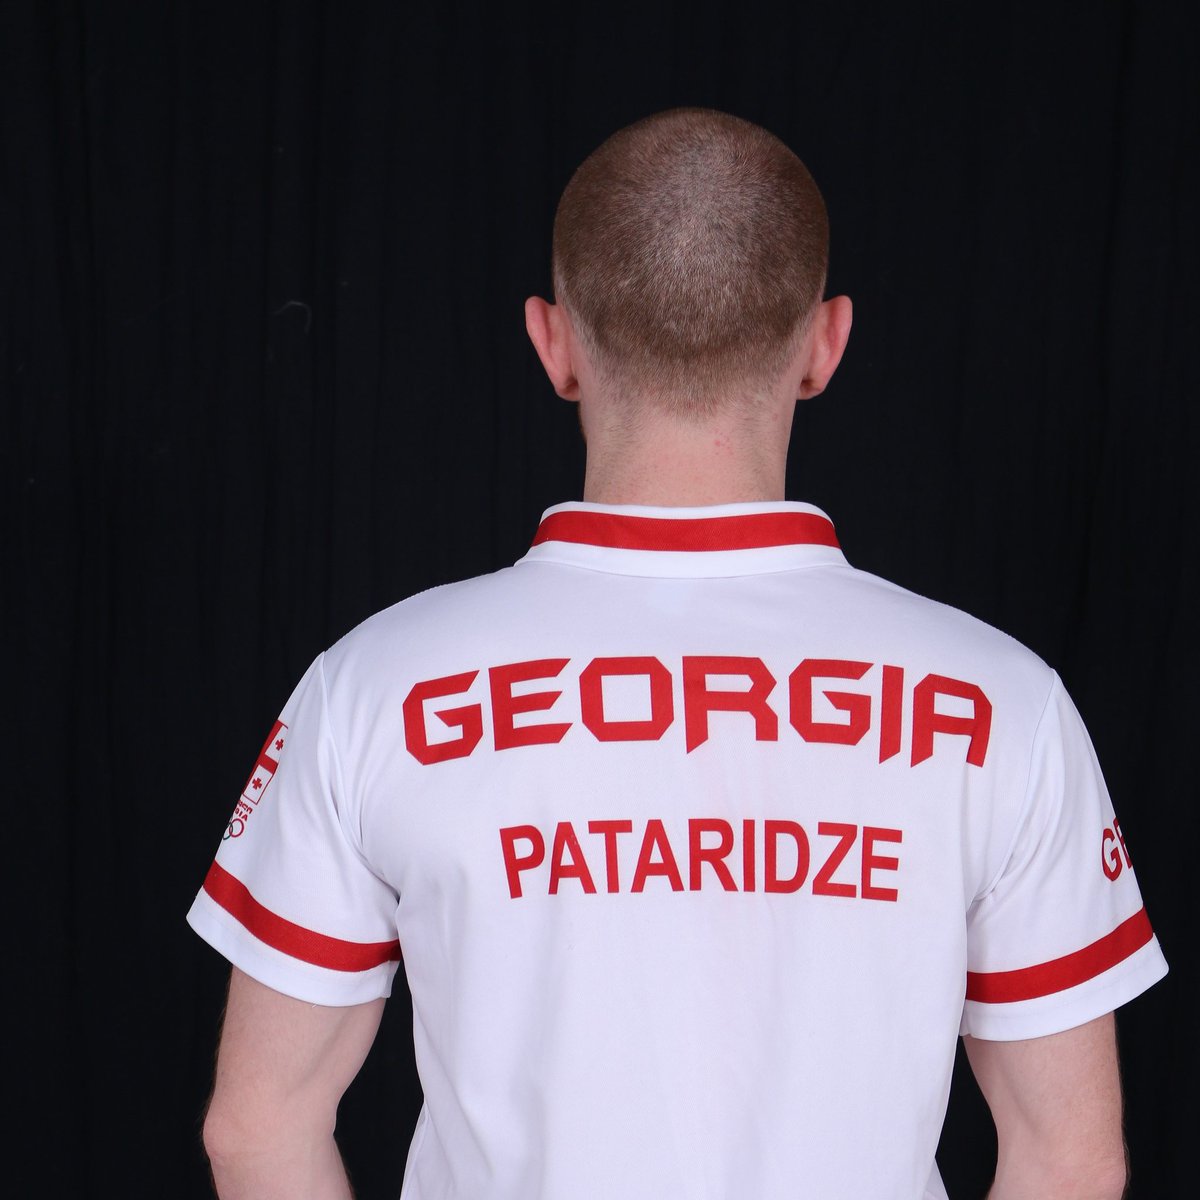 Never forget where you came from, what you stand for and who stands behind your back #georgia🇬🇪 #homeland #DavitPataridze #pataridze #GoldenMan #WINNER #Karate #karatecombat #teamgeorgia #NeverGiveUp #neverforget #behindyourback #family #coach #friends #Tokyo2020